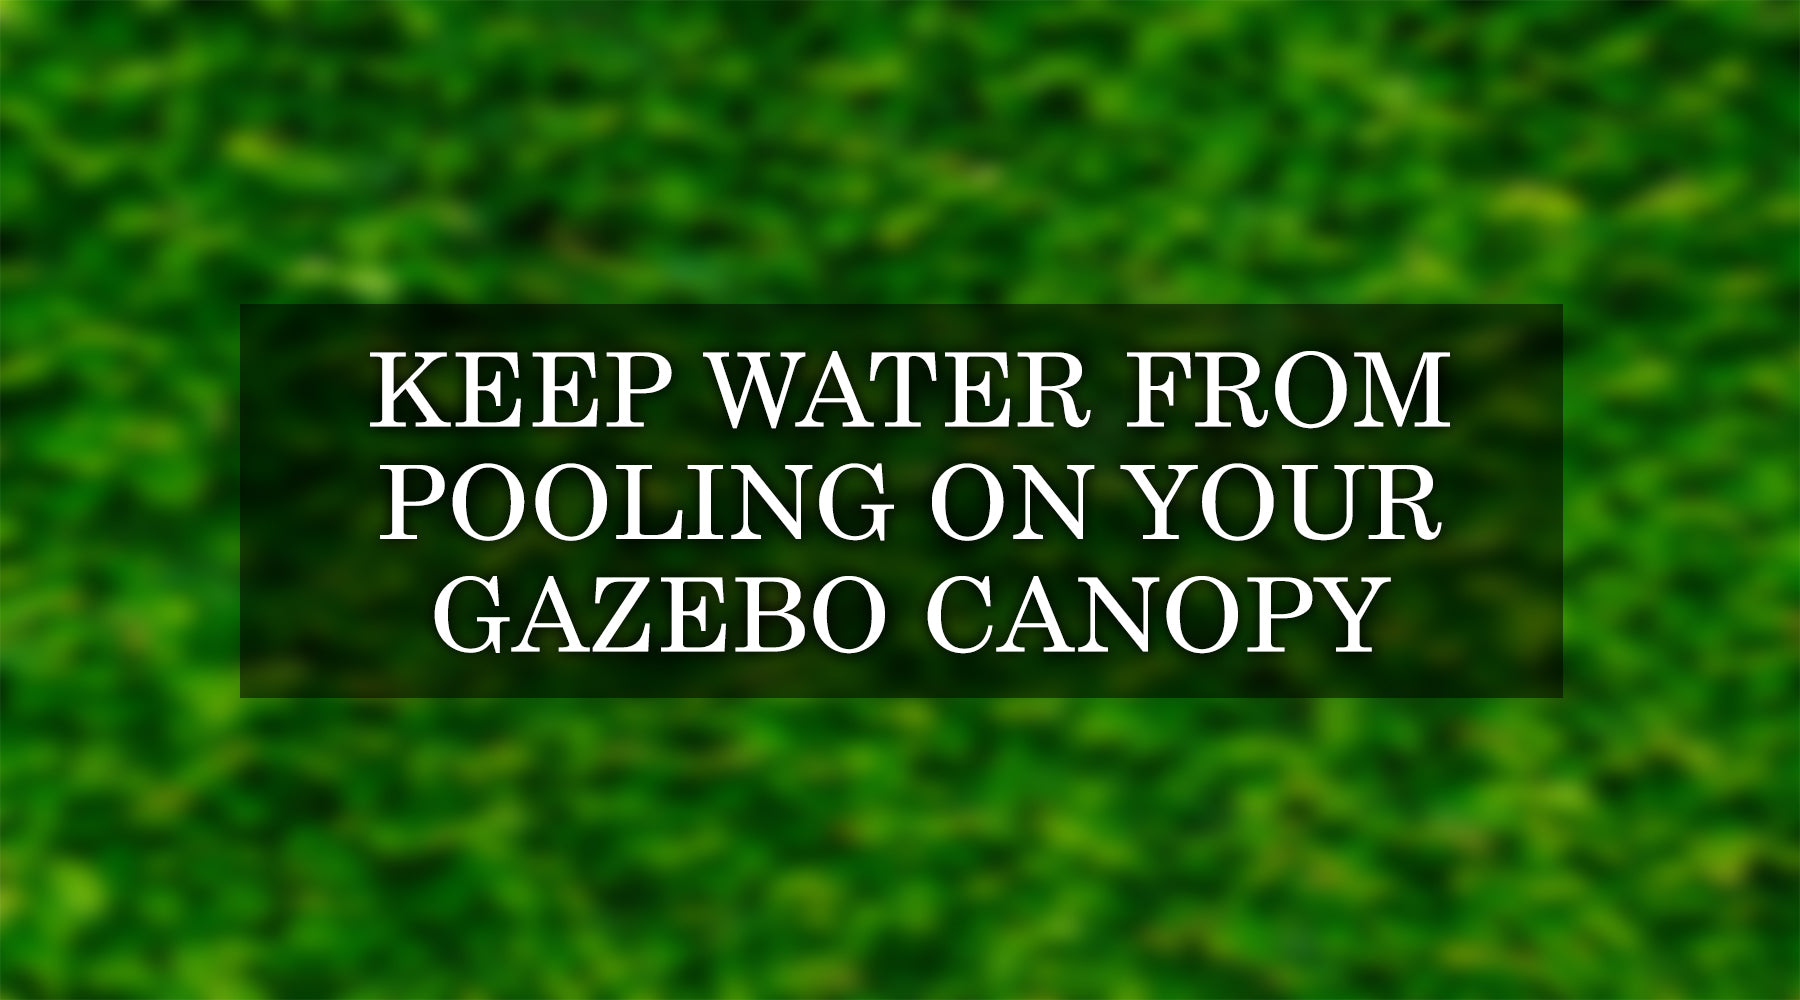 Keep Water from Pooling on Your Gazebo Canopy